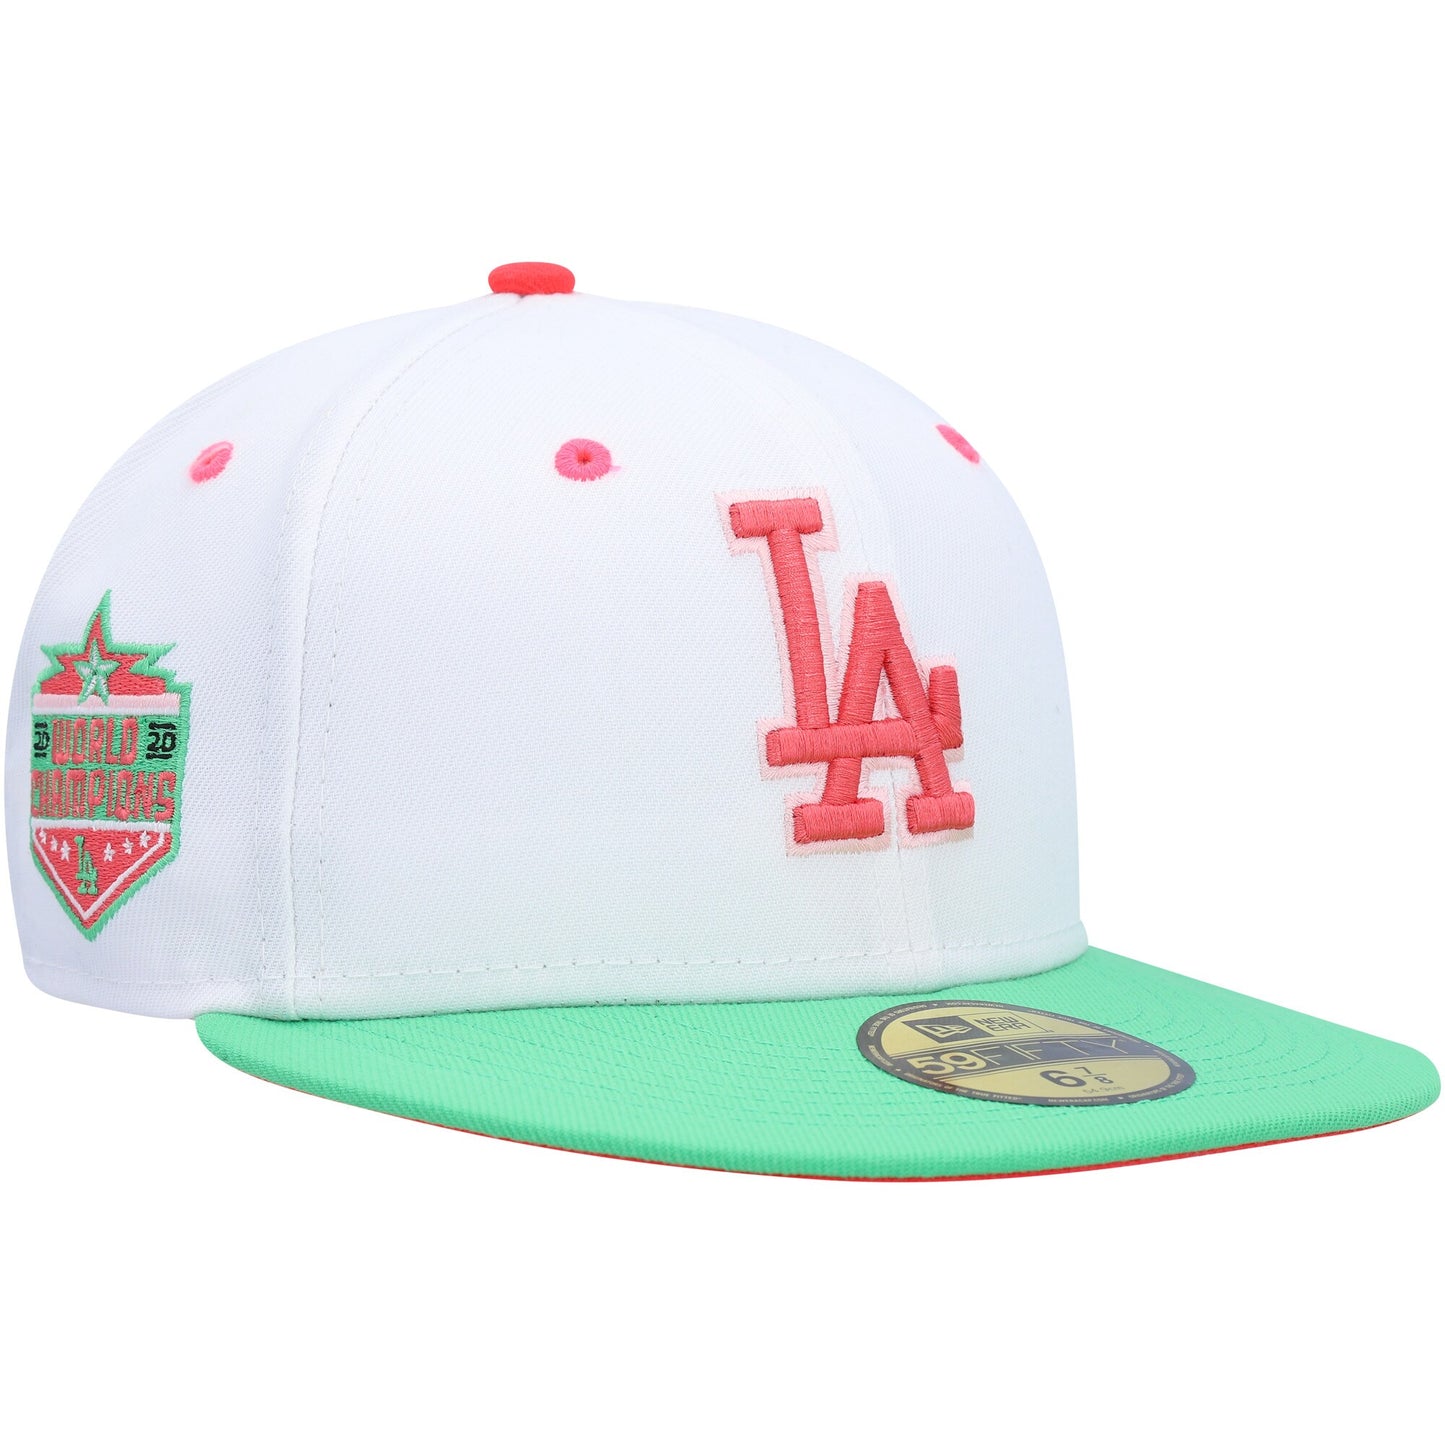 Los Angeles Dodgers New Era Watermelon Lolli 59FIFTY Fitted Hat - White/Green